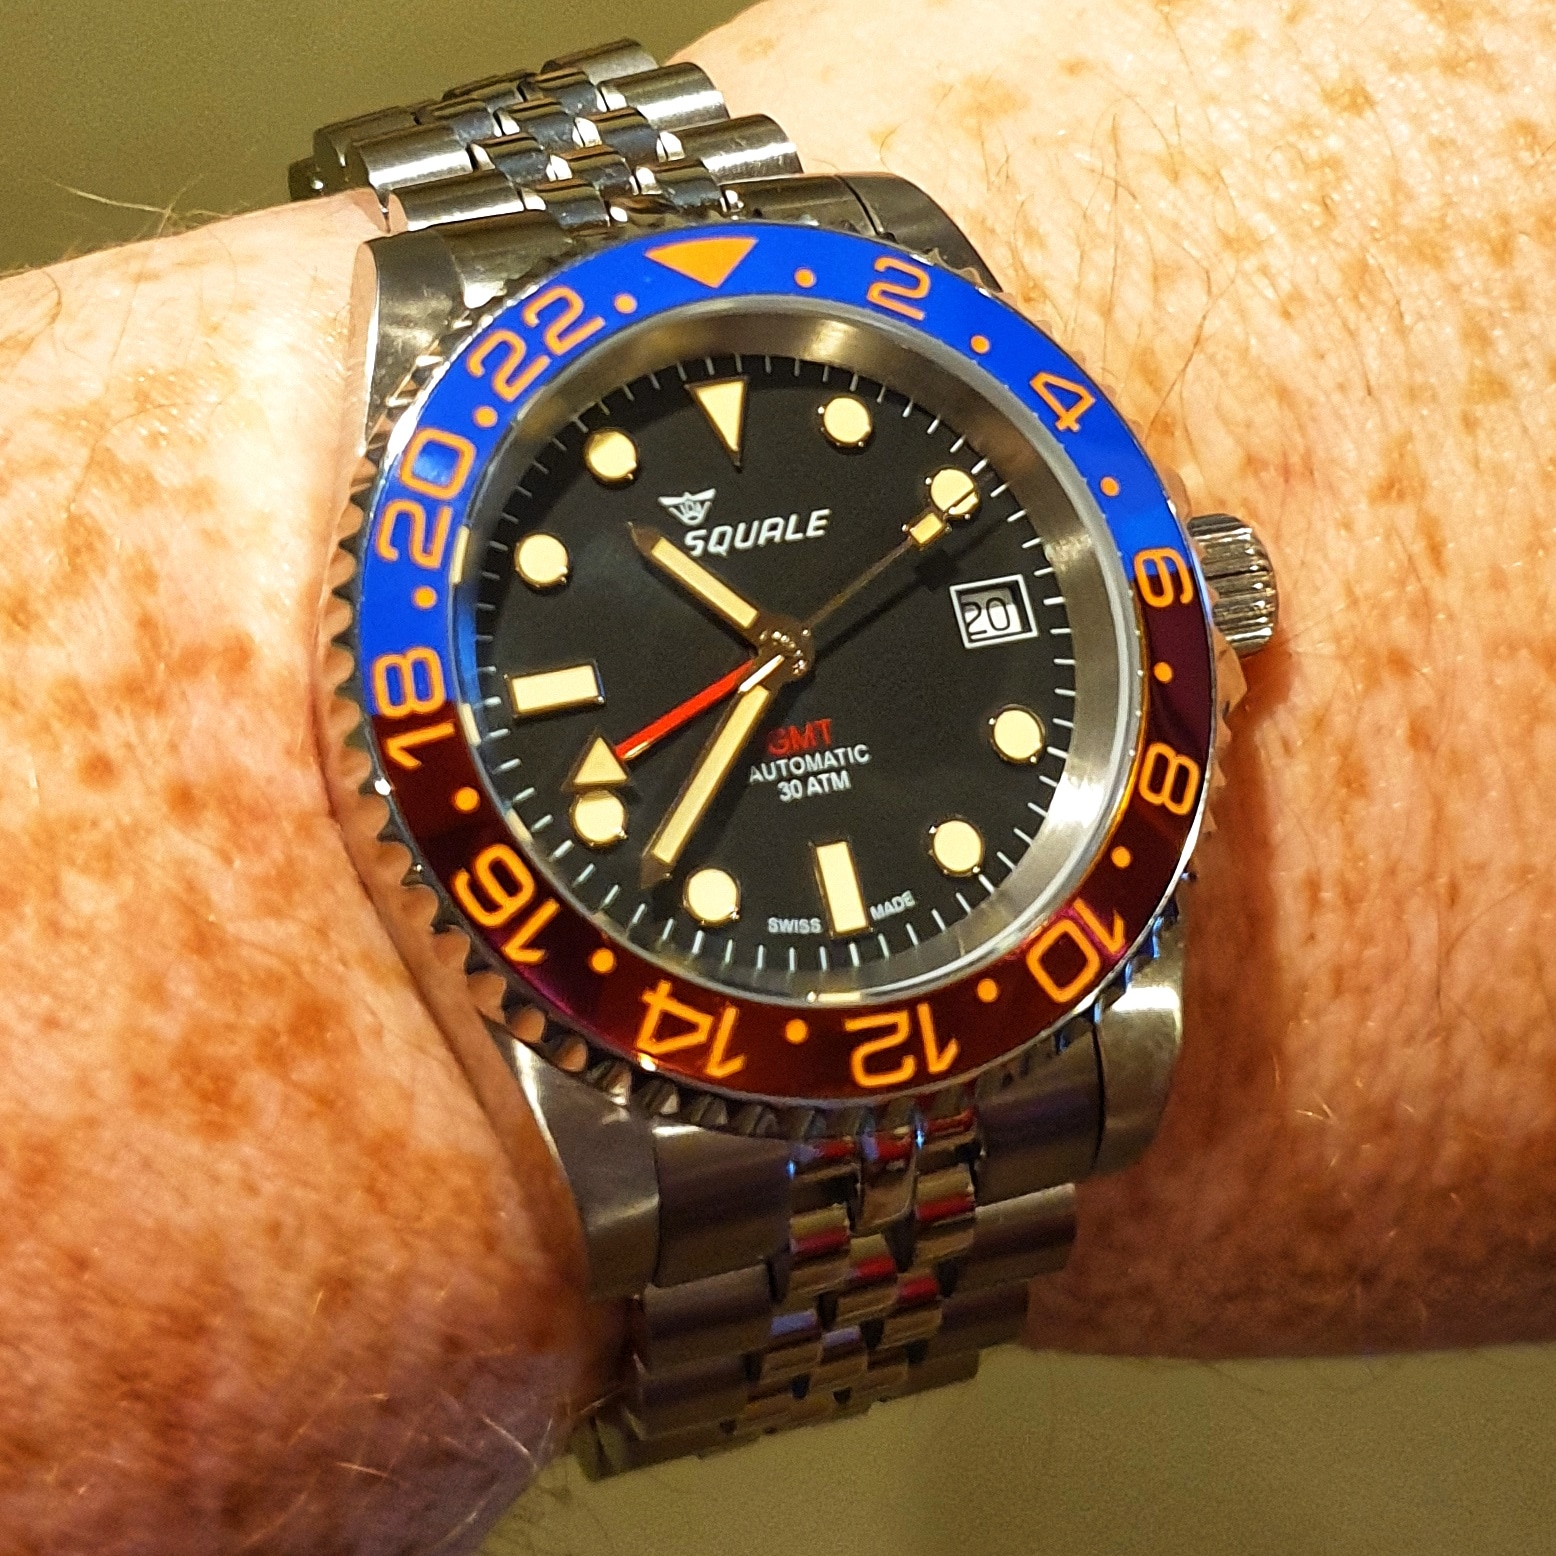 Owner Review: Squale 30 Atmos GMT 1545 - A beautiful watch with flaws